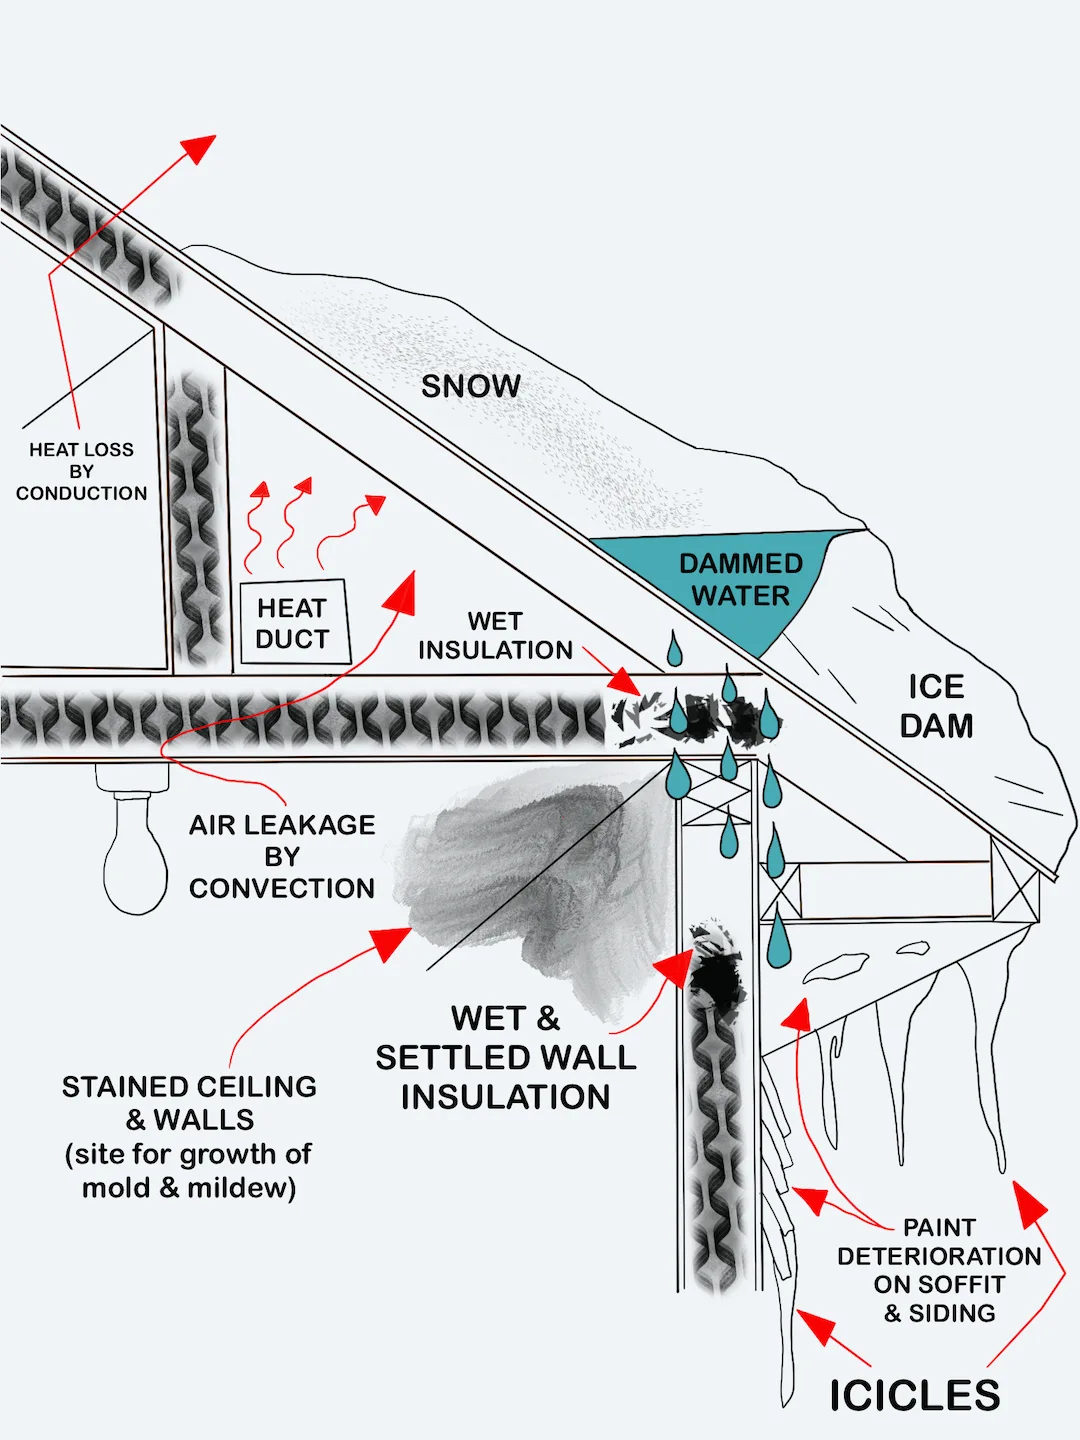 diagram showing ice dam formation on a roof with labeled effects and causes